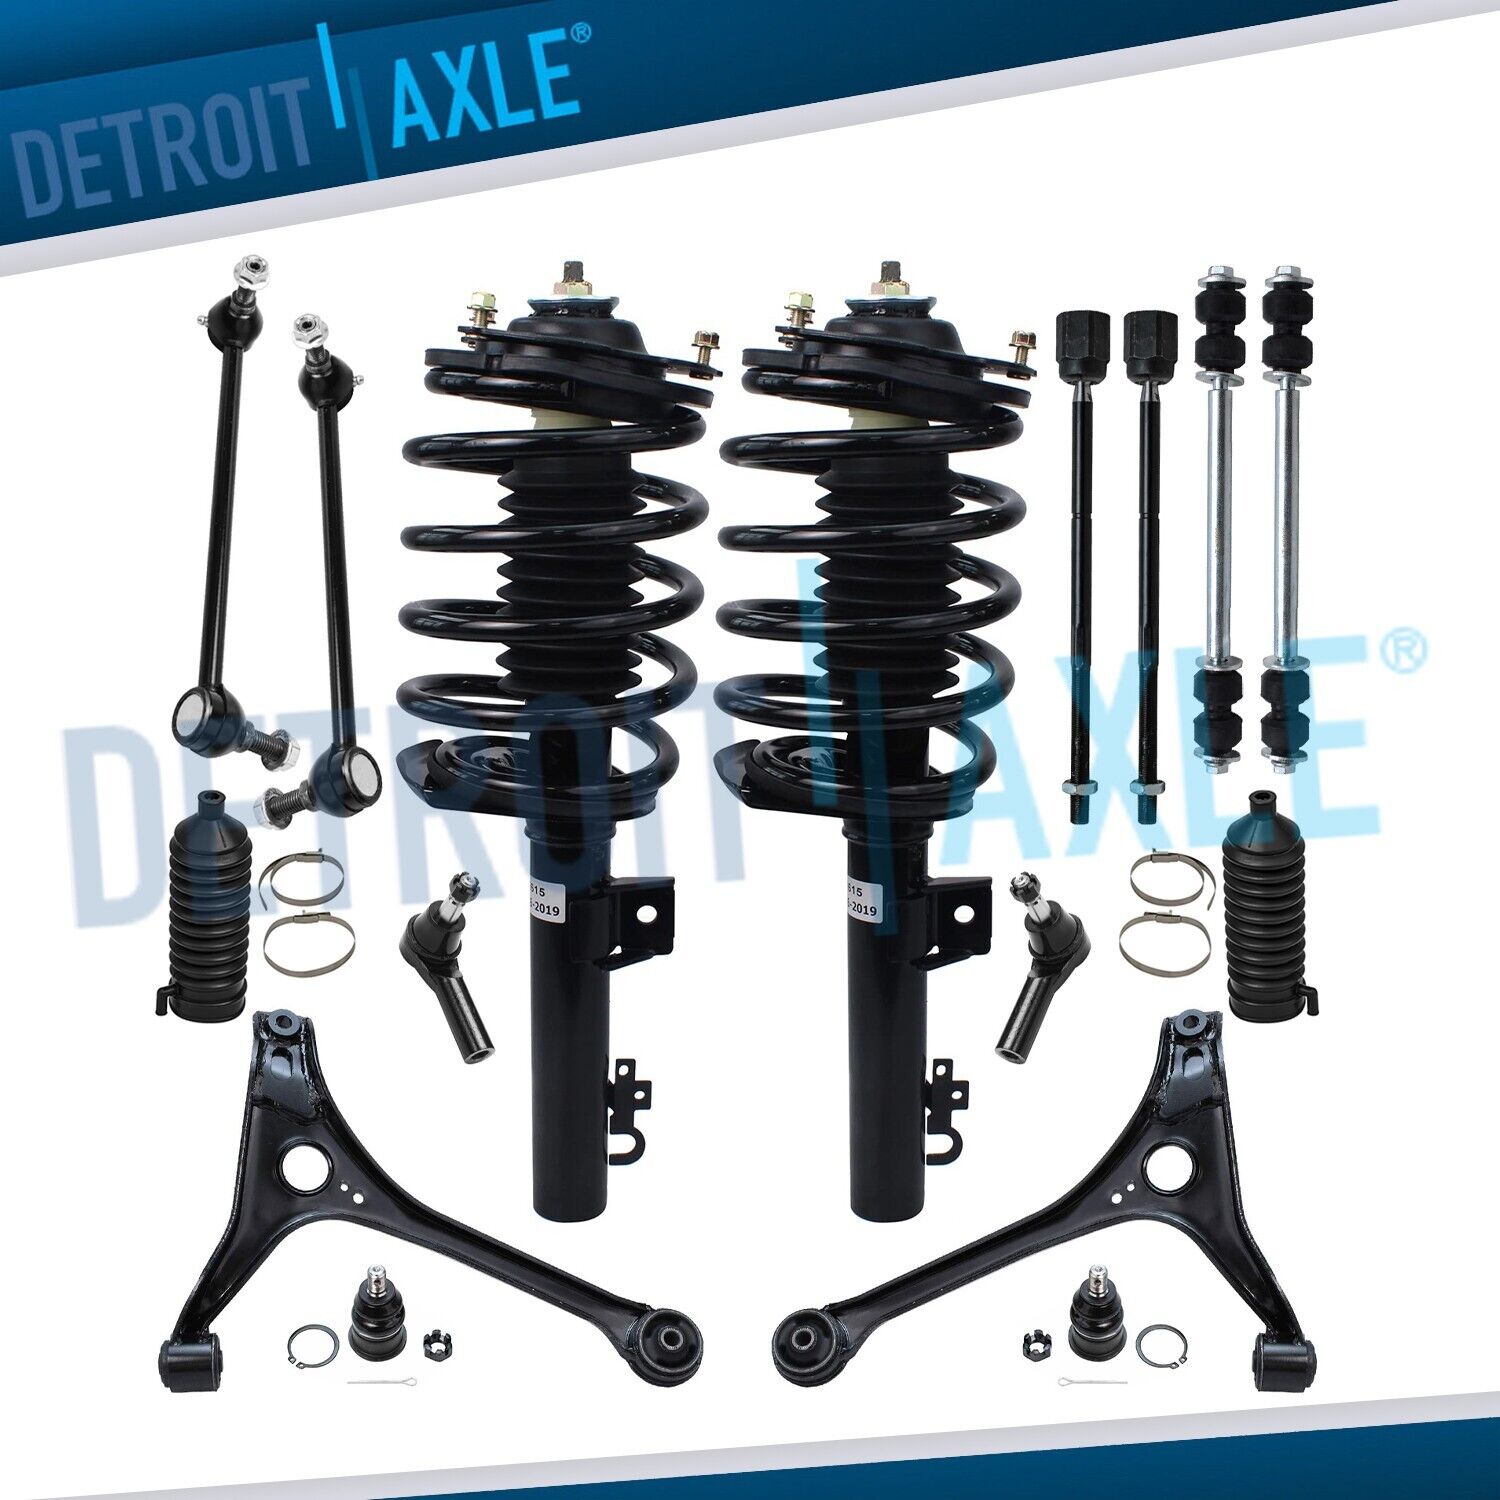 16pc Front Struts Lower Control Arms Kit for 1998-2007 Ford Taurus Mercury Sable